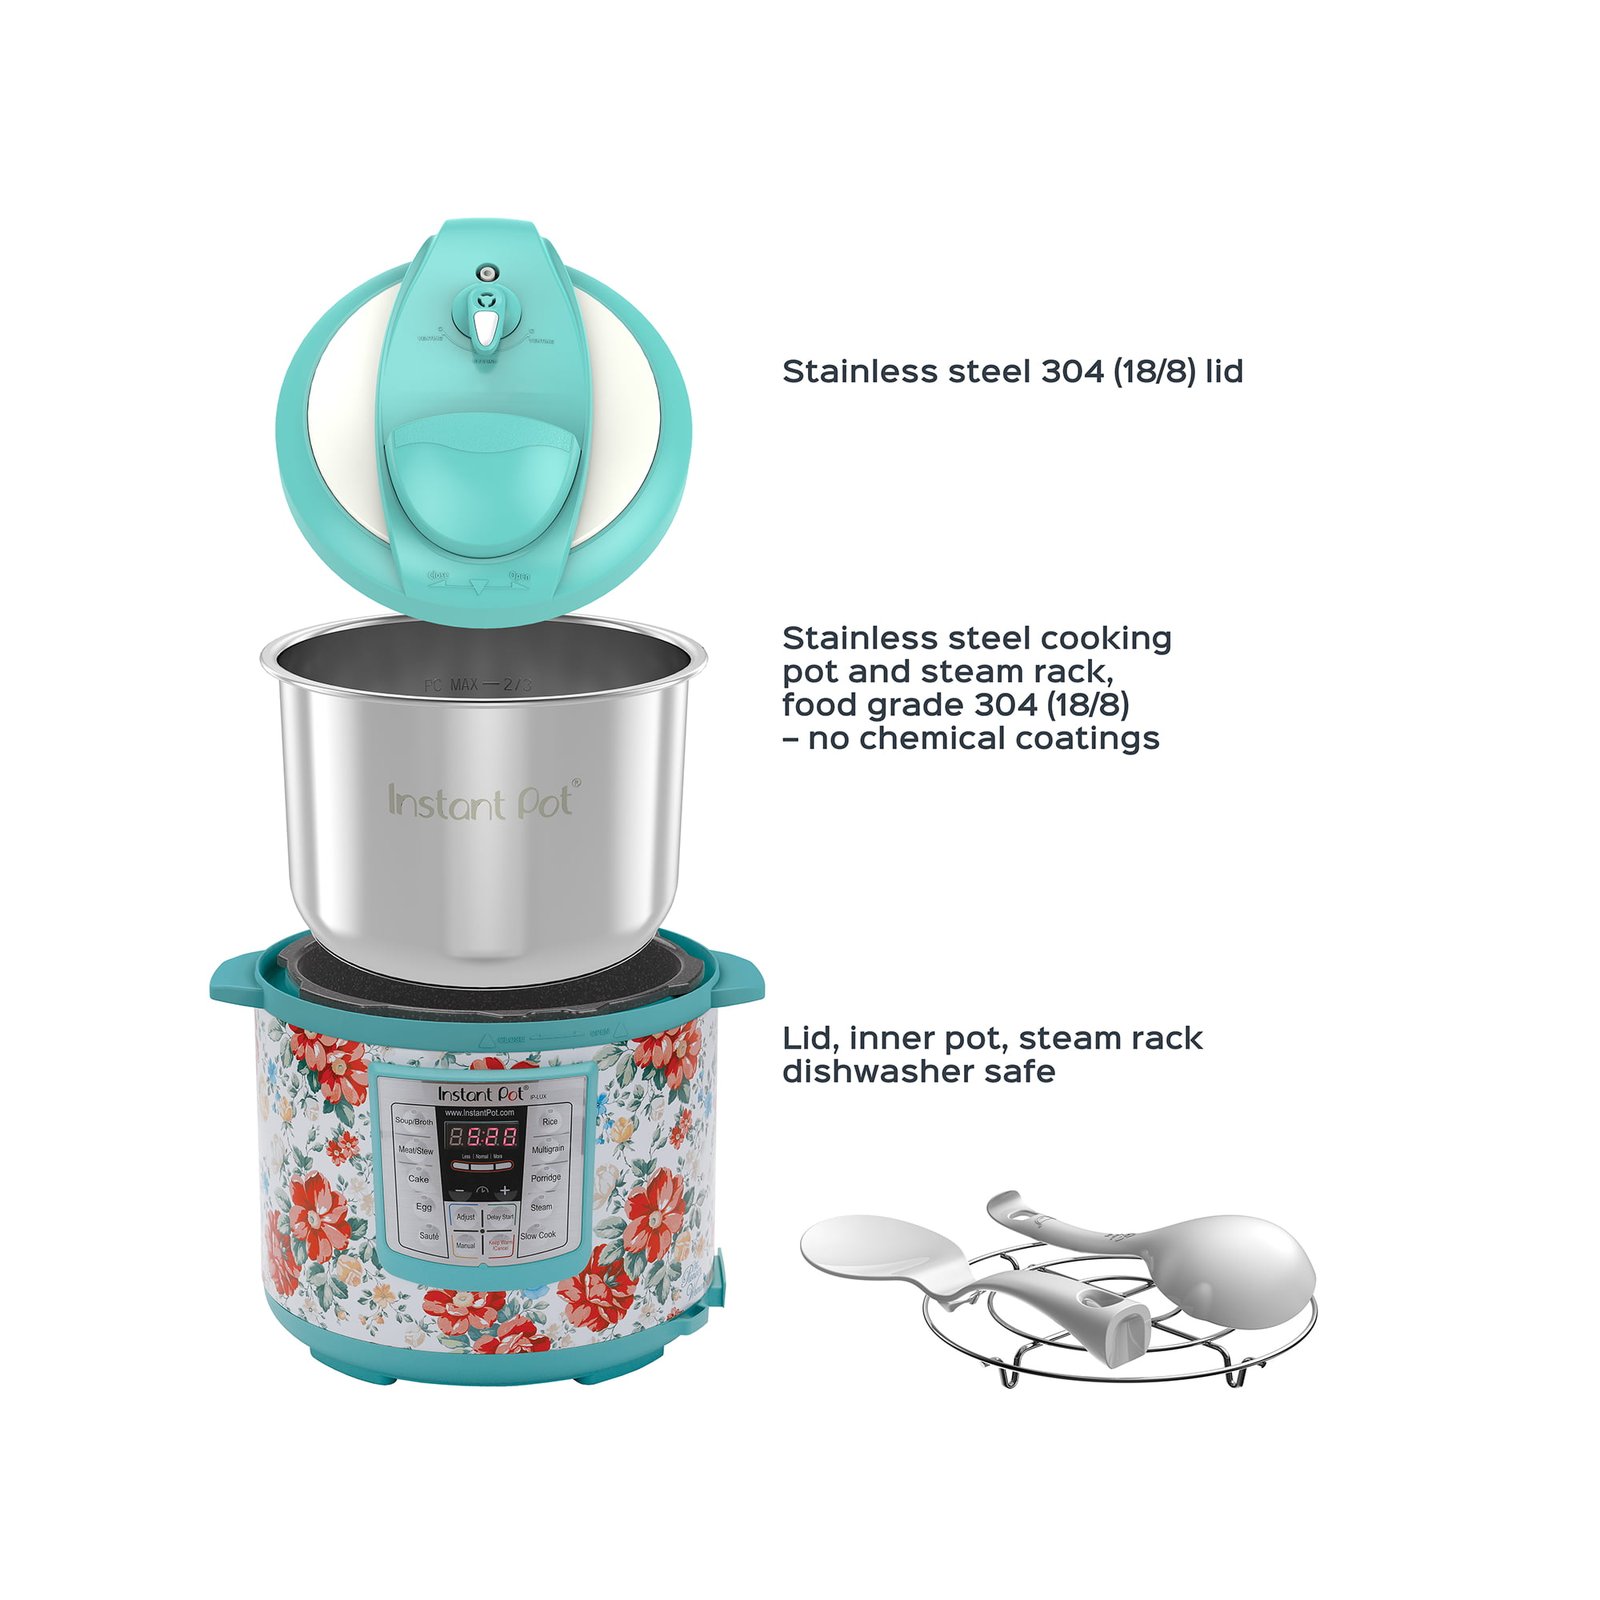 https://themarketdepot.com/wp-content/uploads/2023/01/The-Pioneer-Woman-Instant-Pot-LUX60-6-Qt-Vintage-Floral-6-in-1-Multi-Use-Programmable-Pressure-Cooker-Slow-Cooker-Rice-Cooker-Saute-Steamer-and-Warmer-3.jpeg